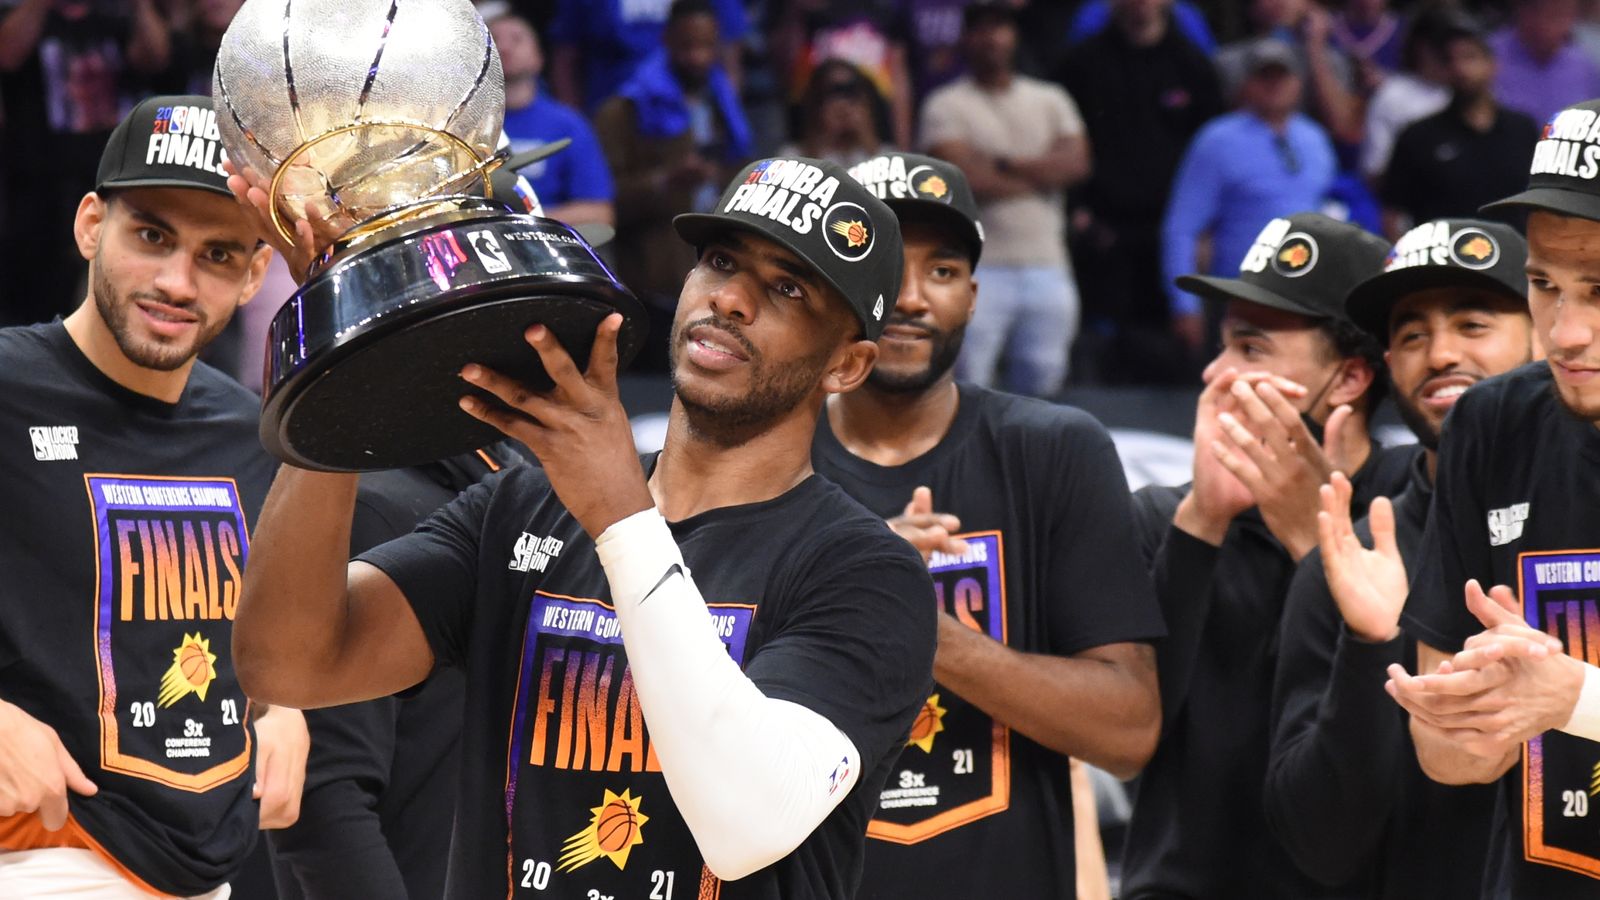 Chris Paul seizes the moment as the Phoenix Suns rise to NBA Finals